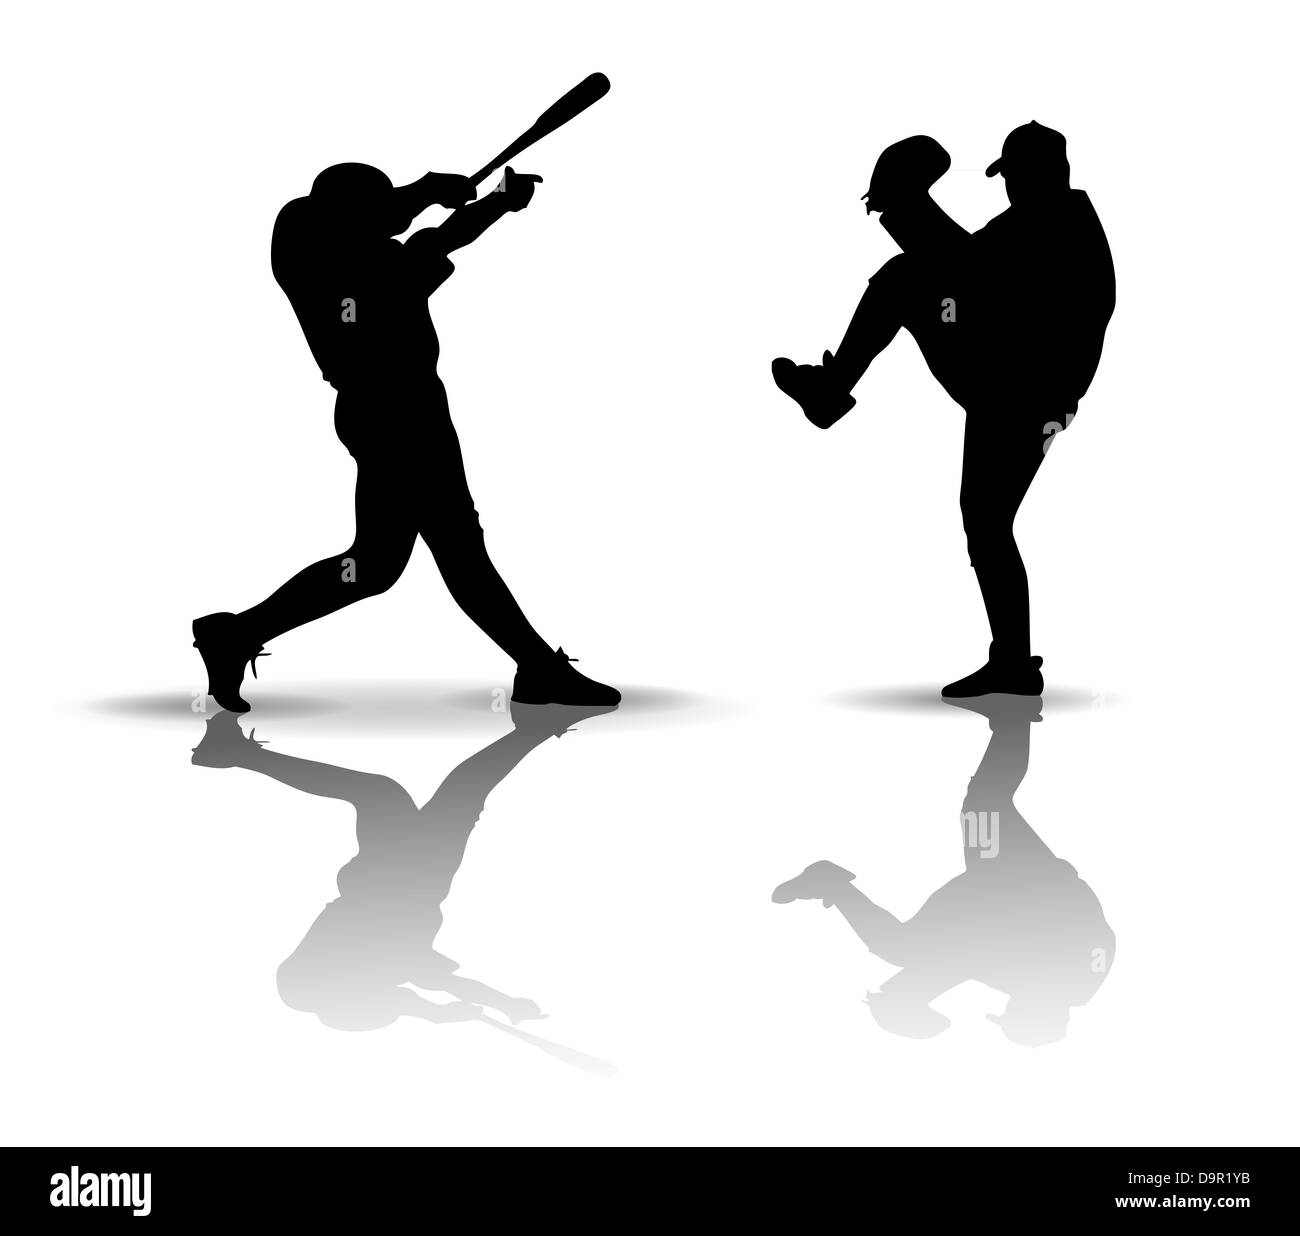 Baseball Player Silhouettes in White on Wallpaper